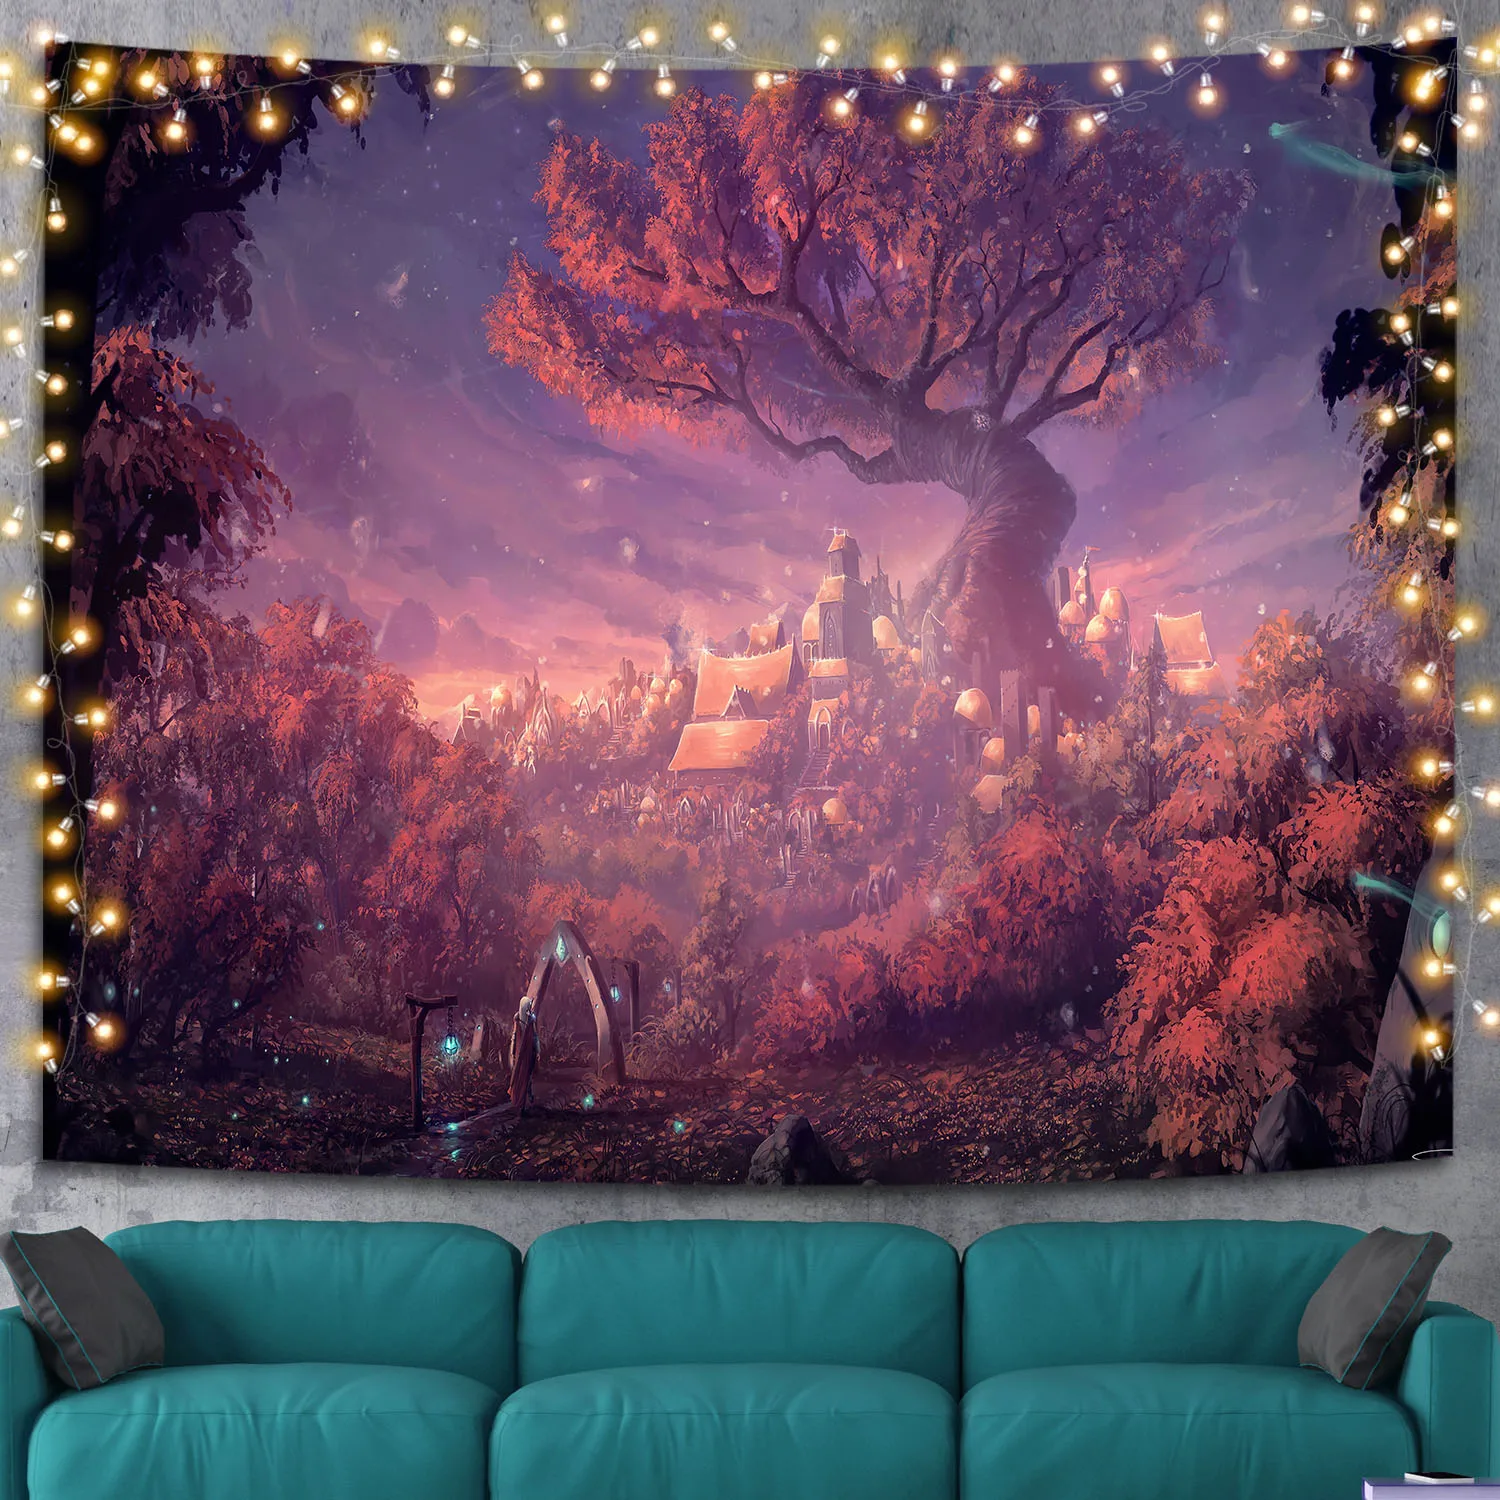 

Misty Forest Tapestry Nature Tree Tapestry Wall Hanging Landscape Wall Tapestry Jungle Creek Psychedelic Tapestry for Room Decor